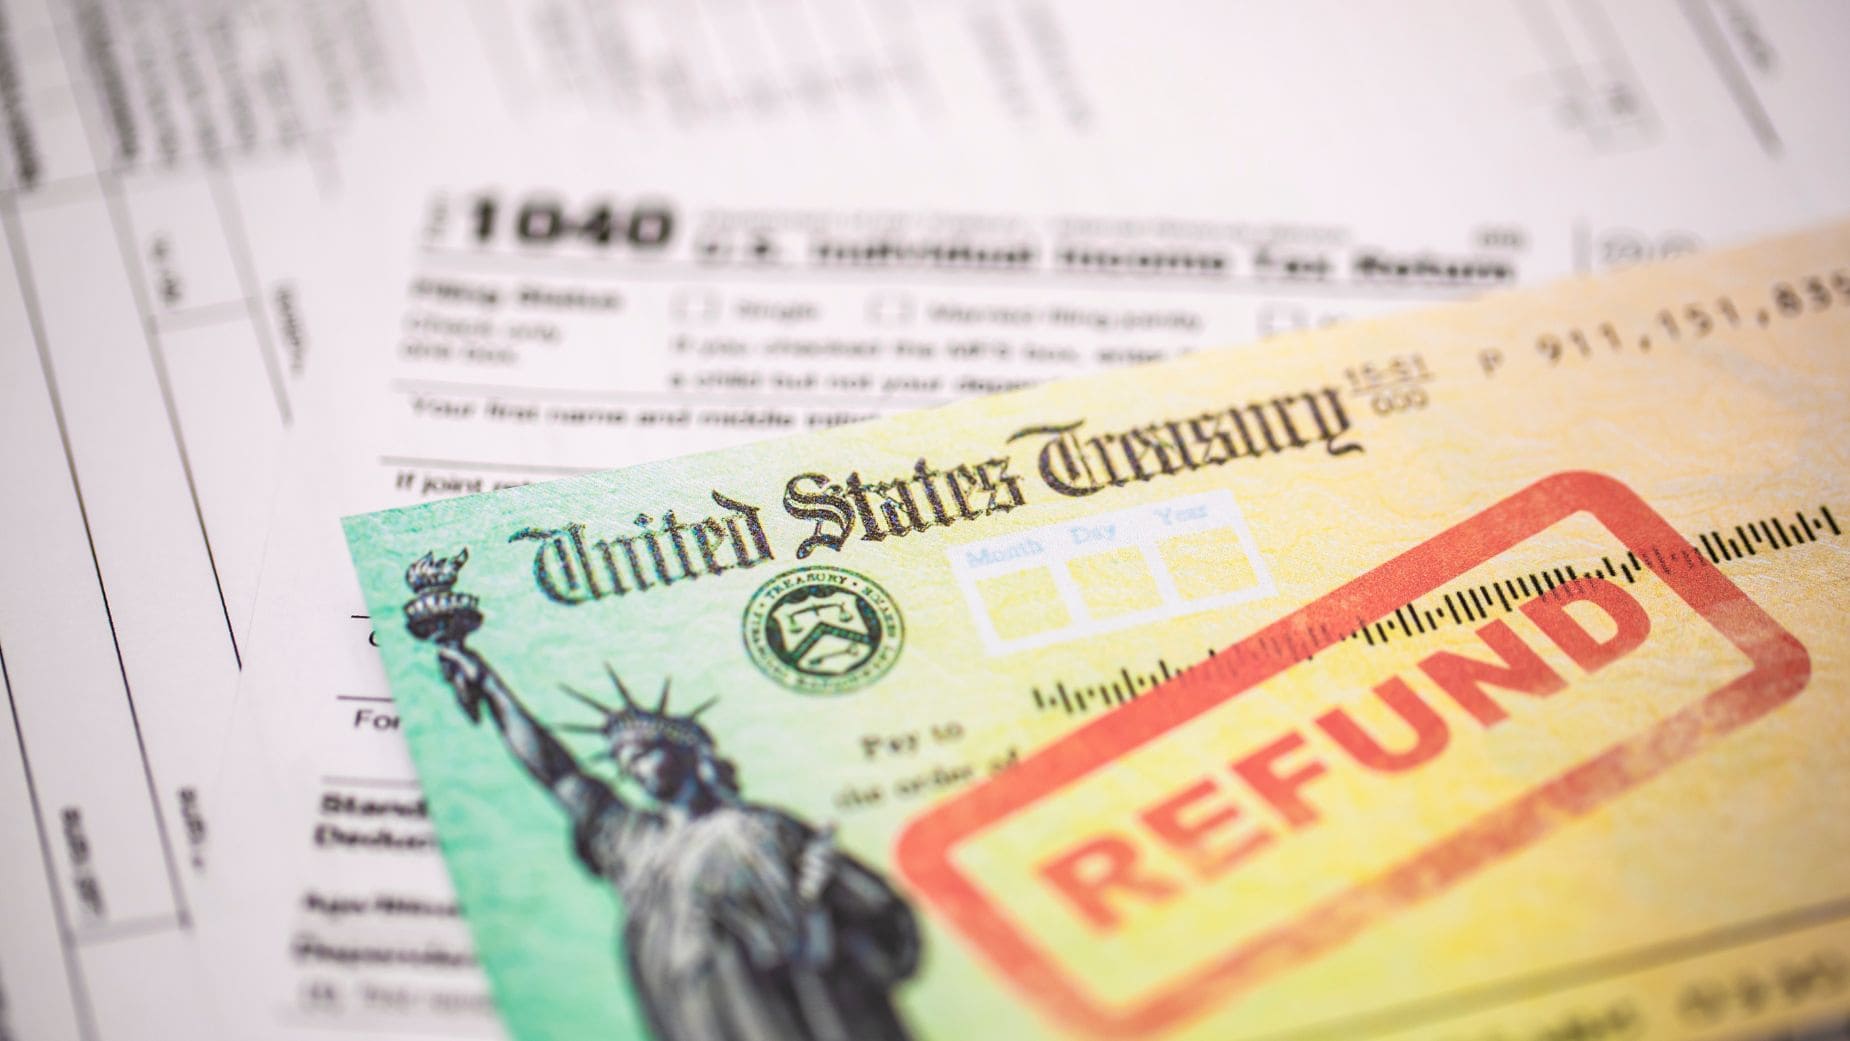 The Tax Refund could be late but IRS has good reasons to delay it